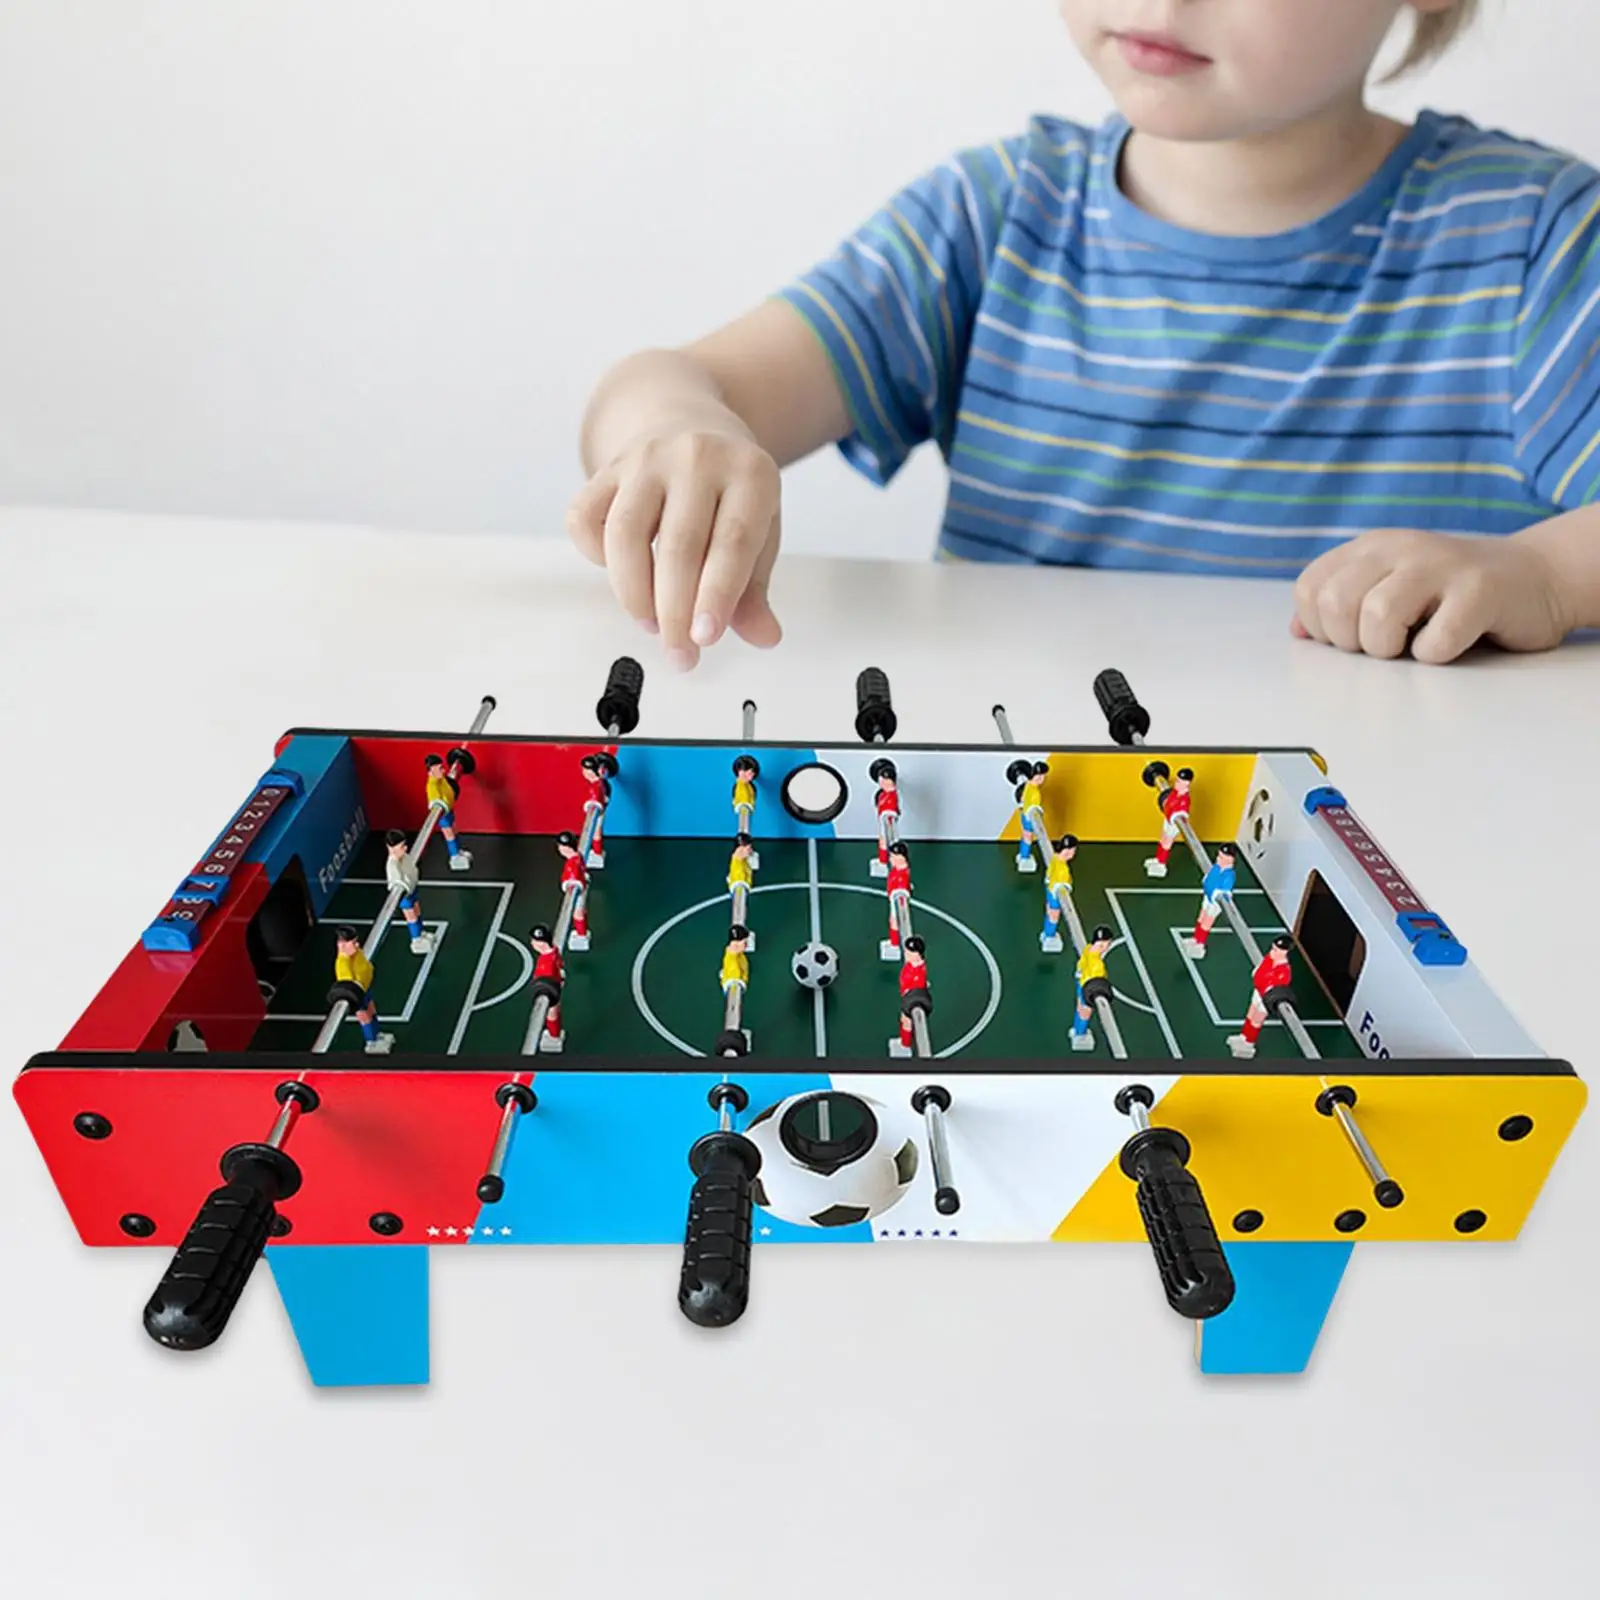 Compact Mini Foosball Table Intellectual Developmental Interactive Motor Skills Tabletop Football Game for Family Game Travel